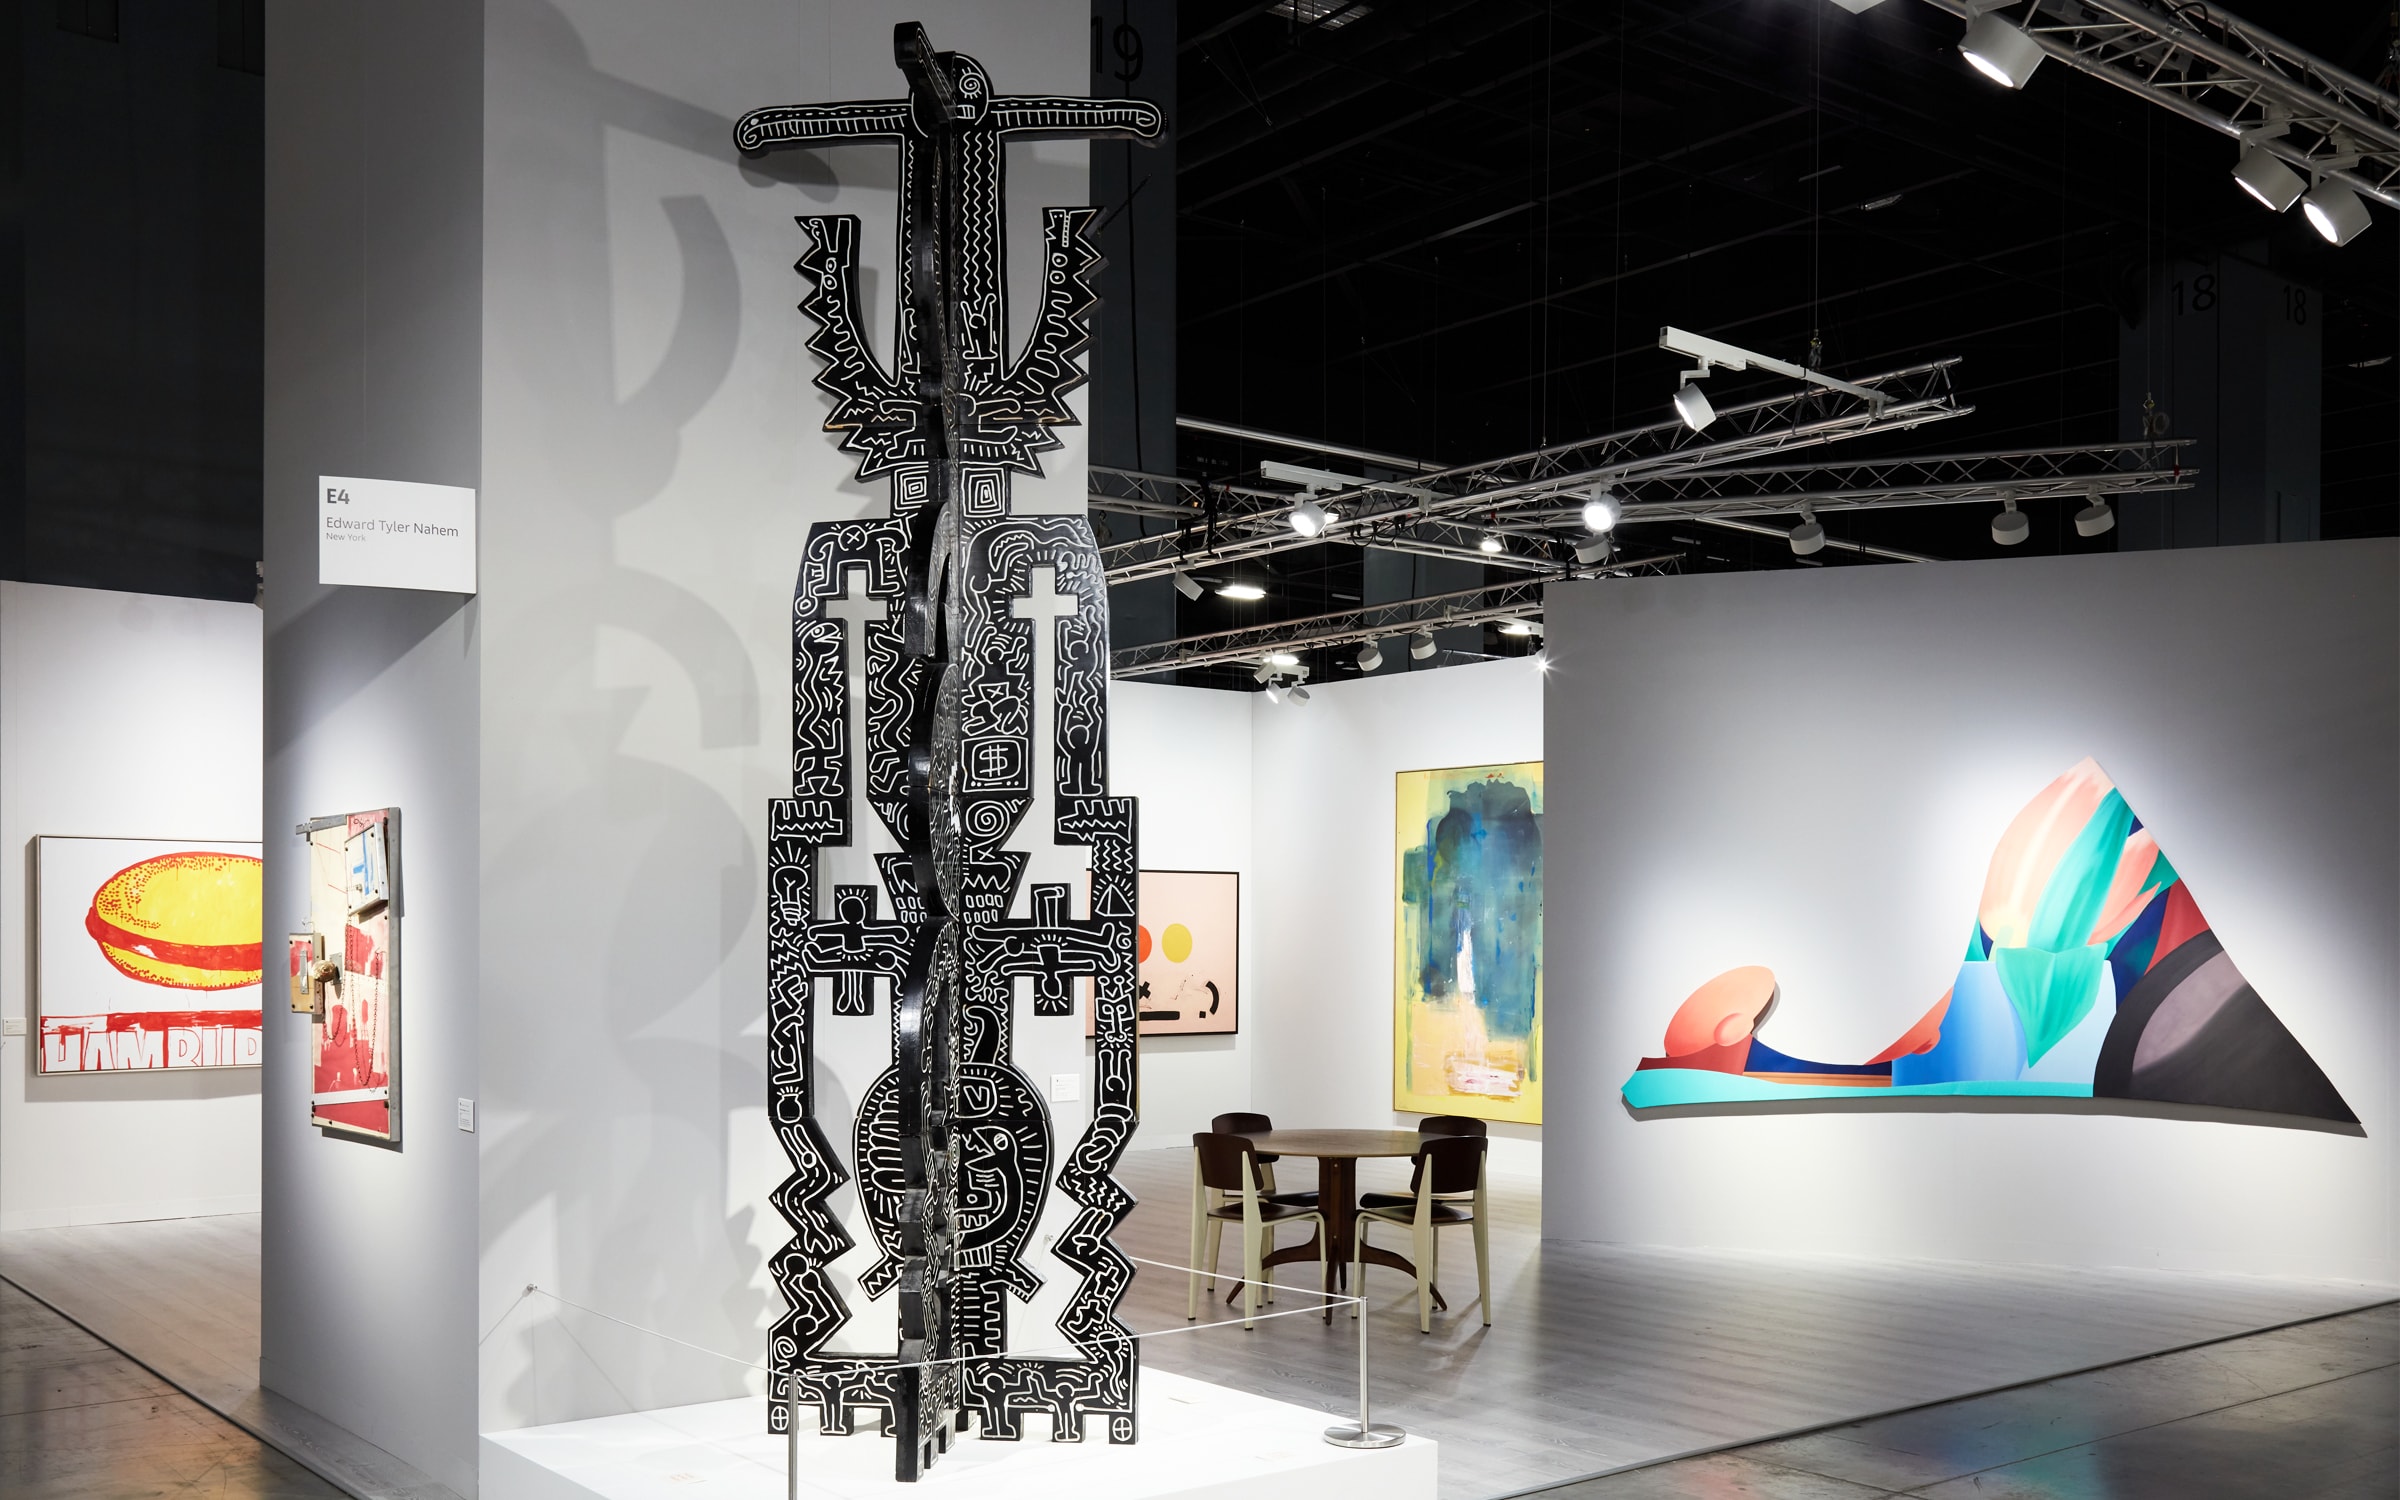 Installation view of Edward Tyler Nahem Fine Art's booth (E4). A rare totemic sculpture by Keith Haring is prominently featured at the New York gallery's stand.